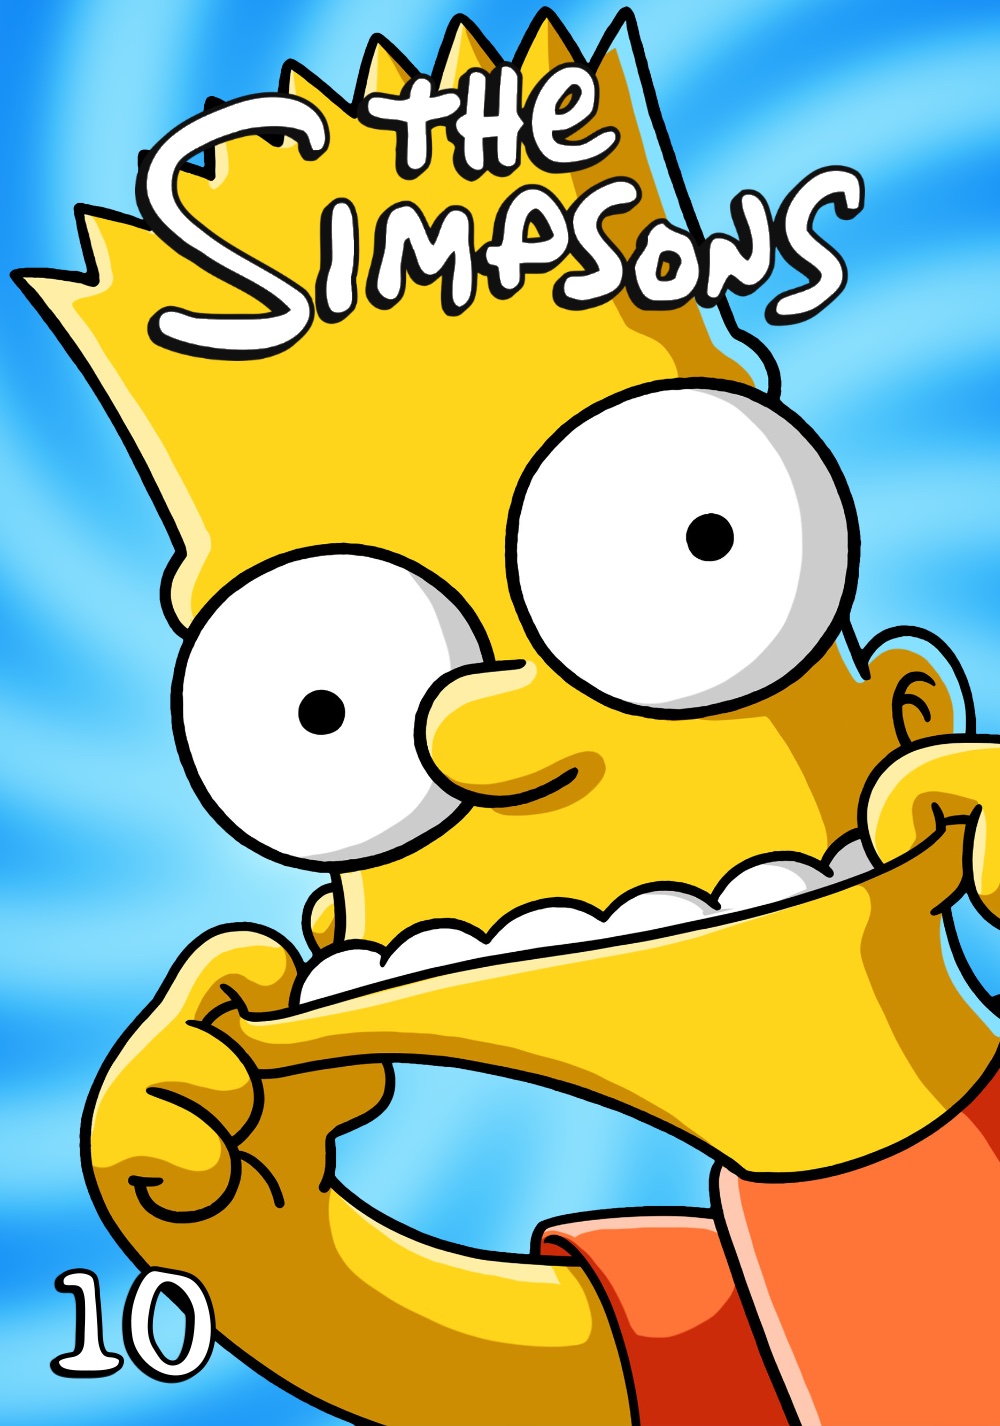 The Simpsons *Ultimate Collection* S10 (1998) BDRip 1080p HEVC 10-bit EAC3-5.1 MultiSub Retail